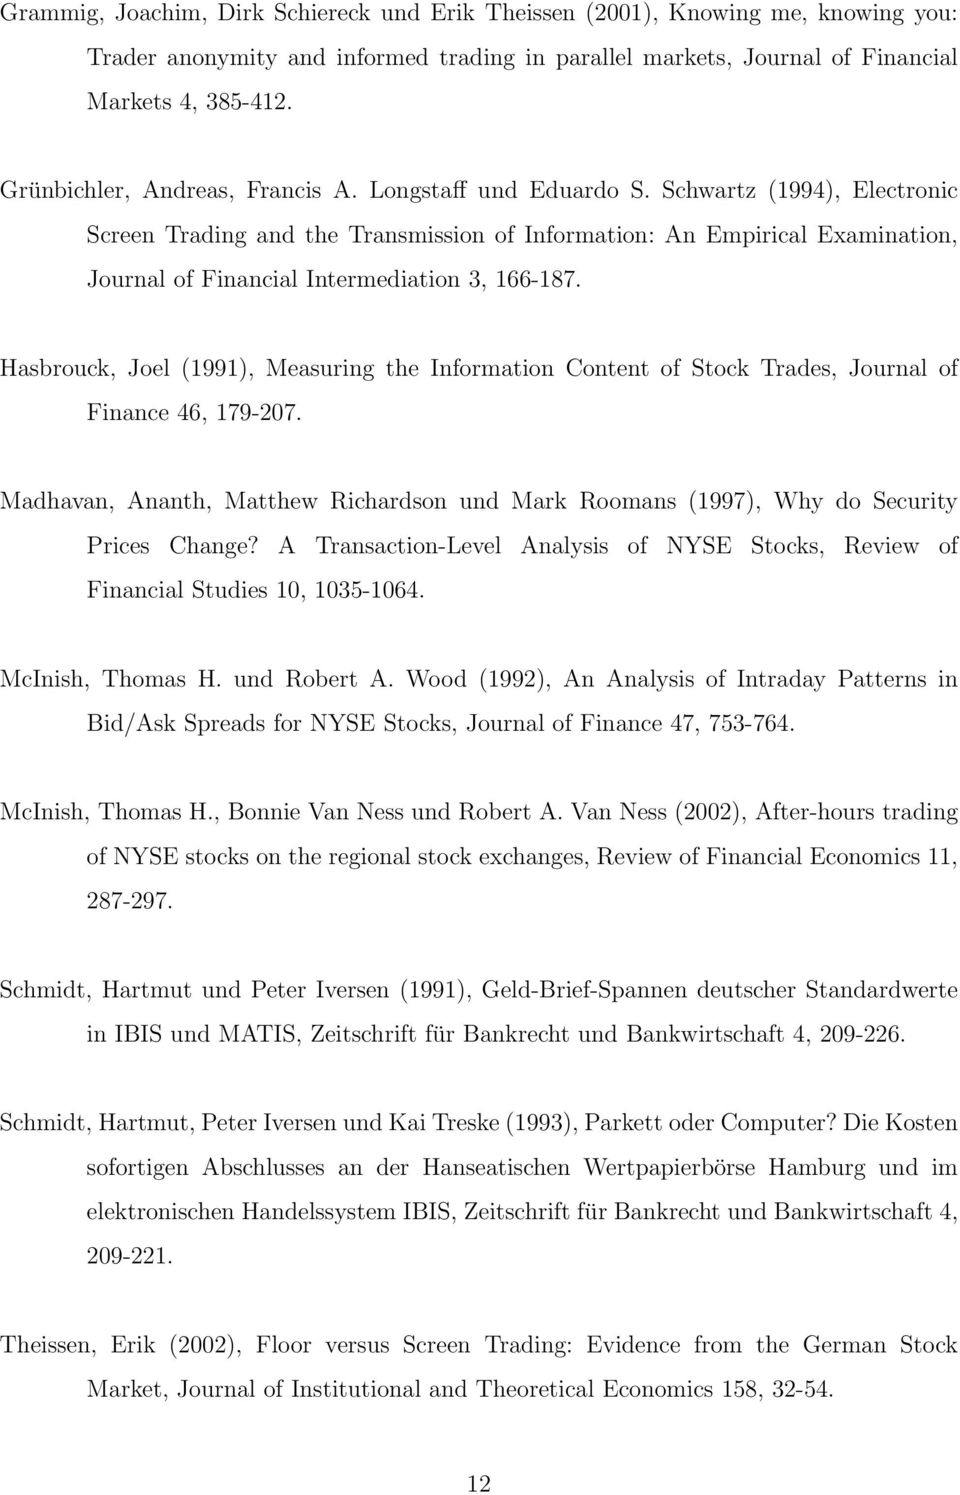 Schwartz (1994), Electronic Screen Trading and the Transmission of Information: An Empirical Examination, Journal of Financial Intermediation 3, 166-187.